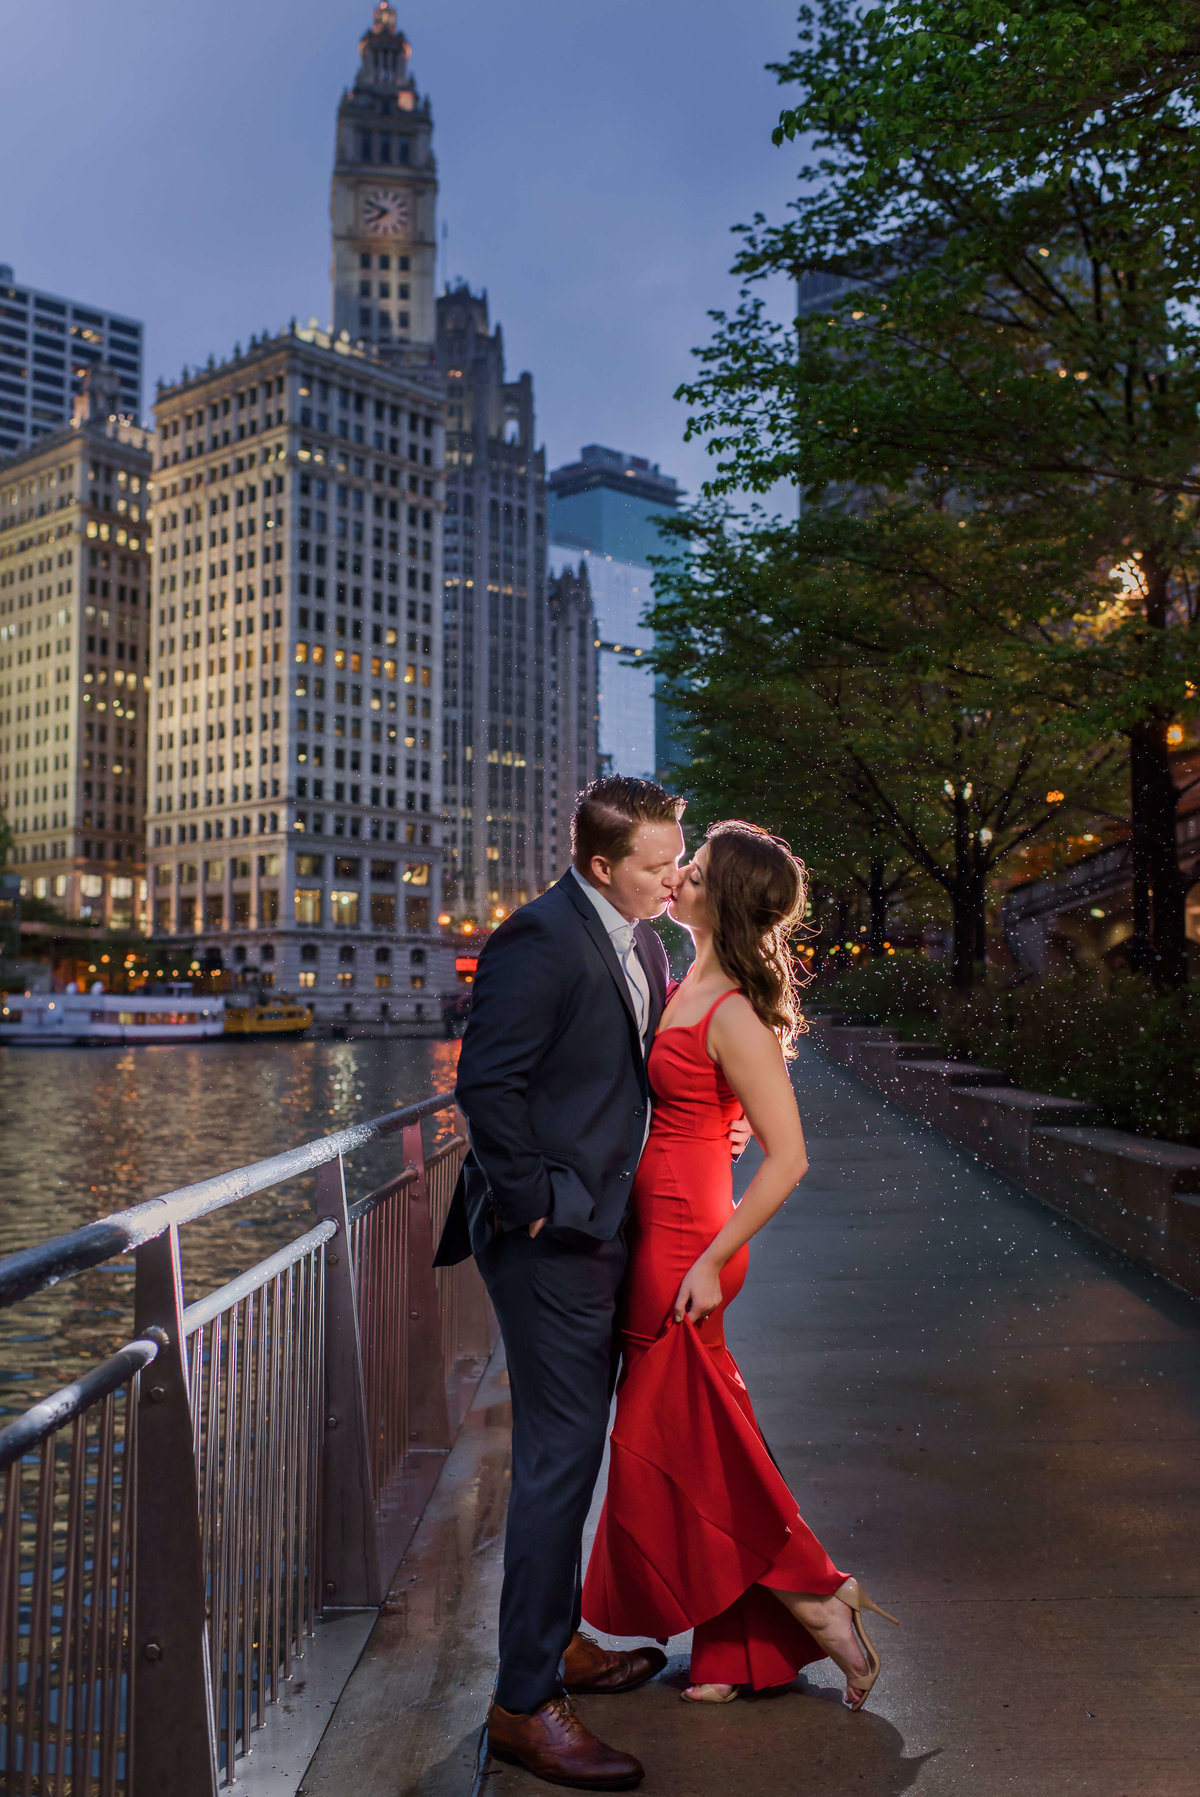 Stunning photo of a couple kissing surrounded by the lights and buildings of Downtown Chicago